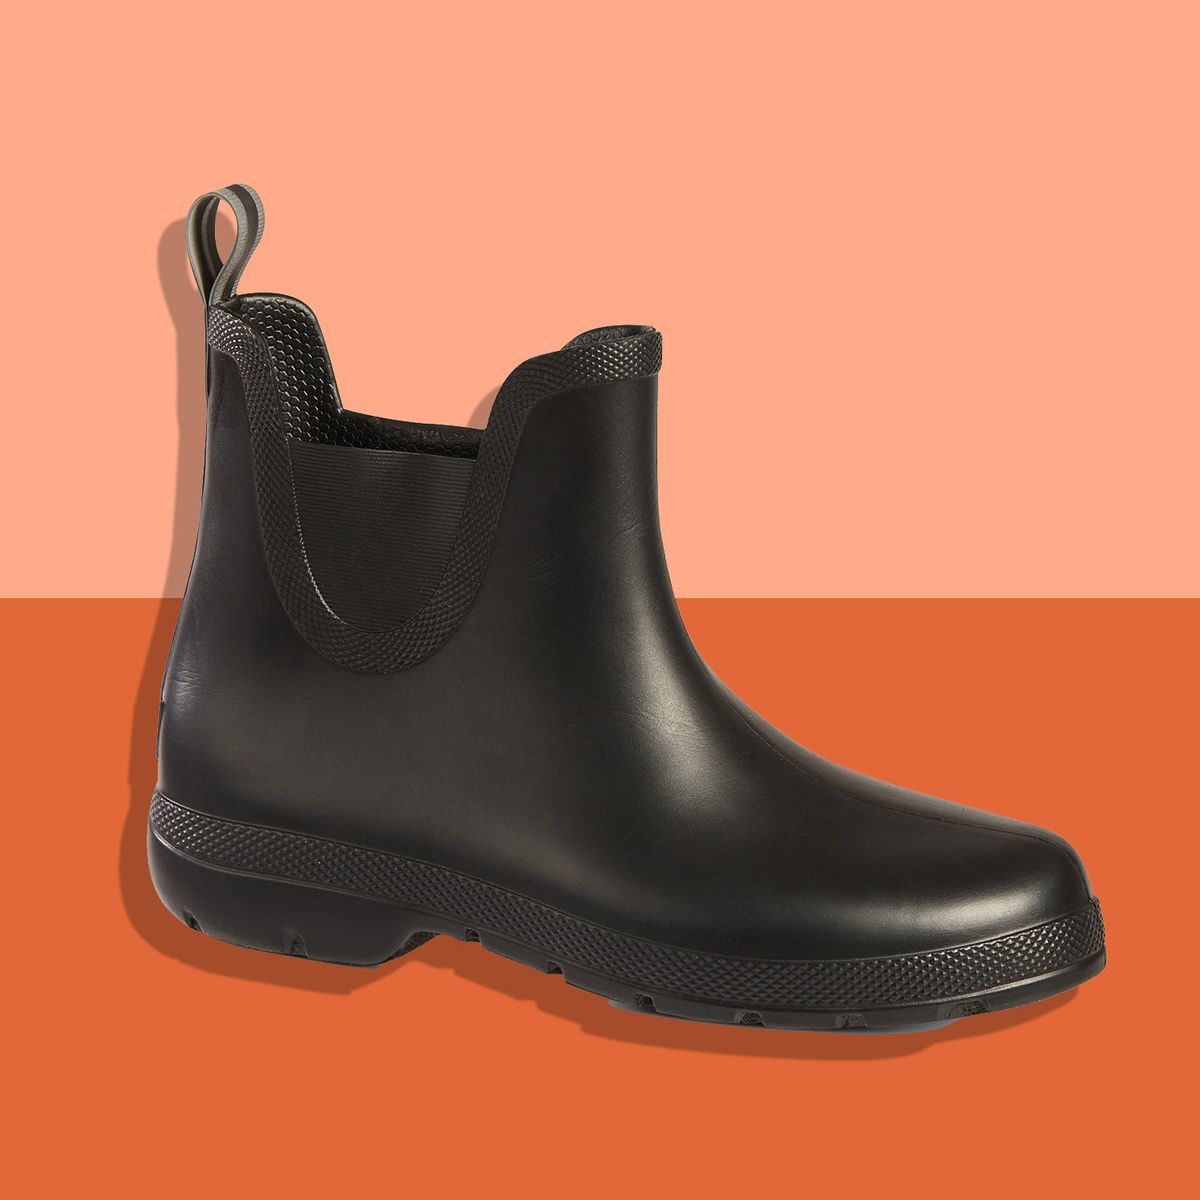 blundstone rubber boots